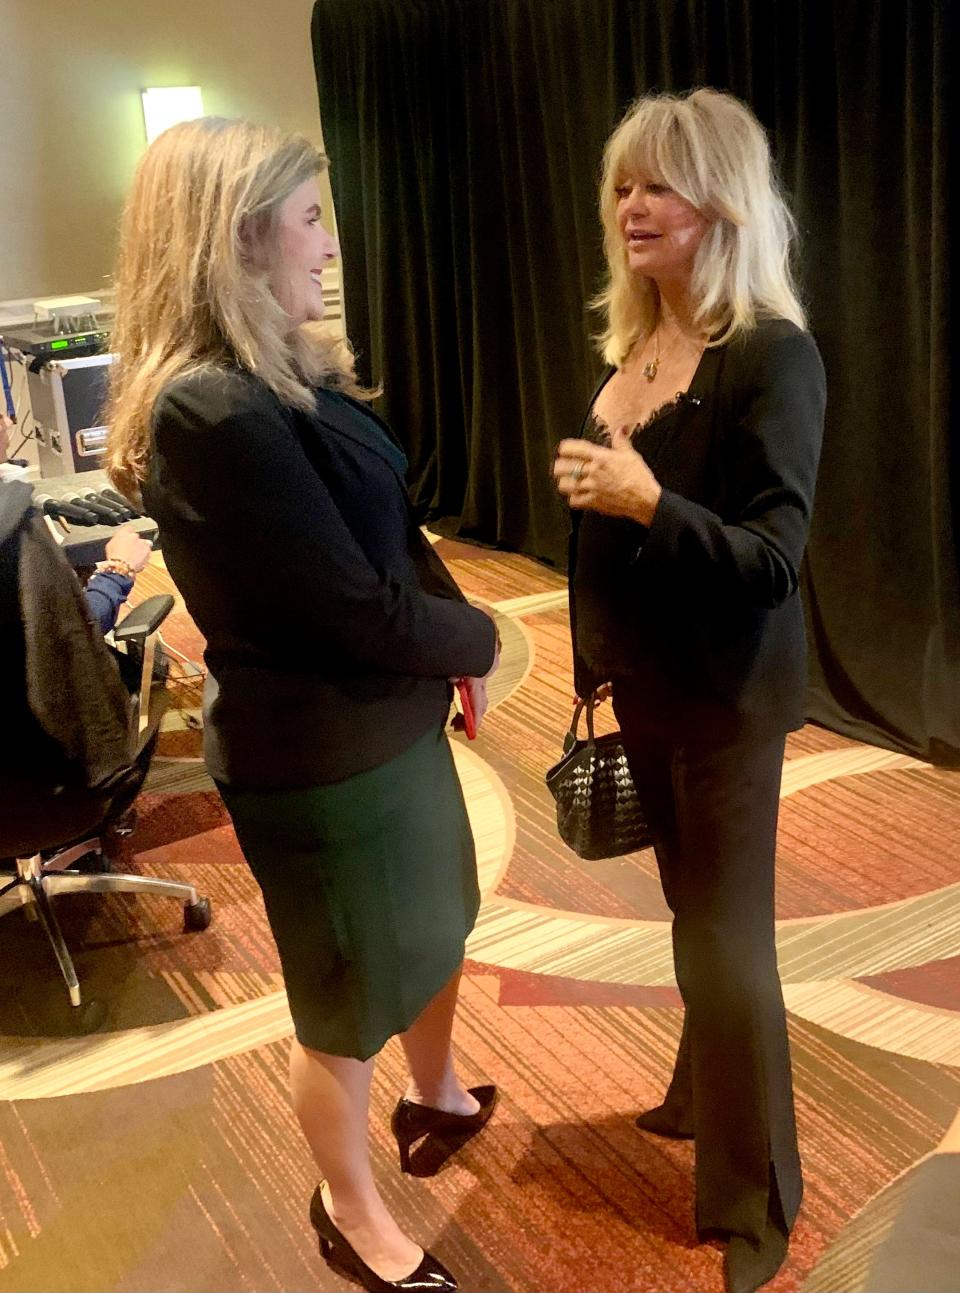 Goldie Hawn, right, actress and founder of MindUP and The Goldie Hawn Foundation, speaks backstage with Nicole Carroll, president of News and editor-in-chief of USA TODAY during the 2022 Concordia Annual Summit on Sept. 20, 2022, in New York City.